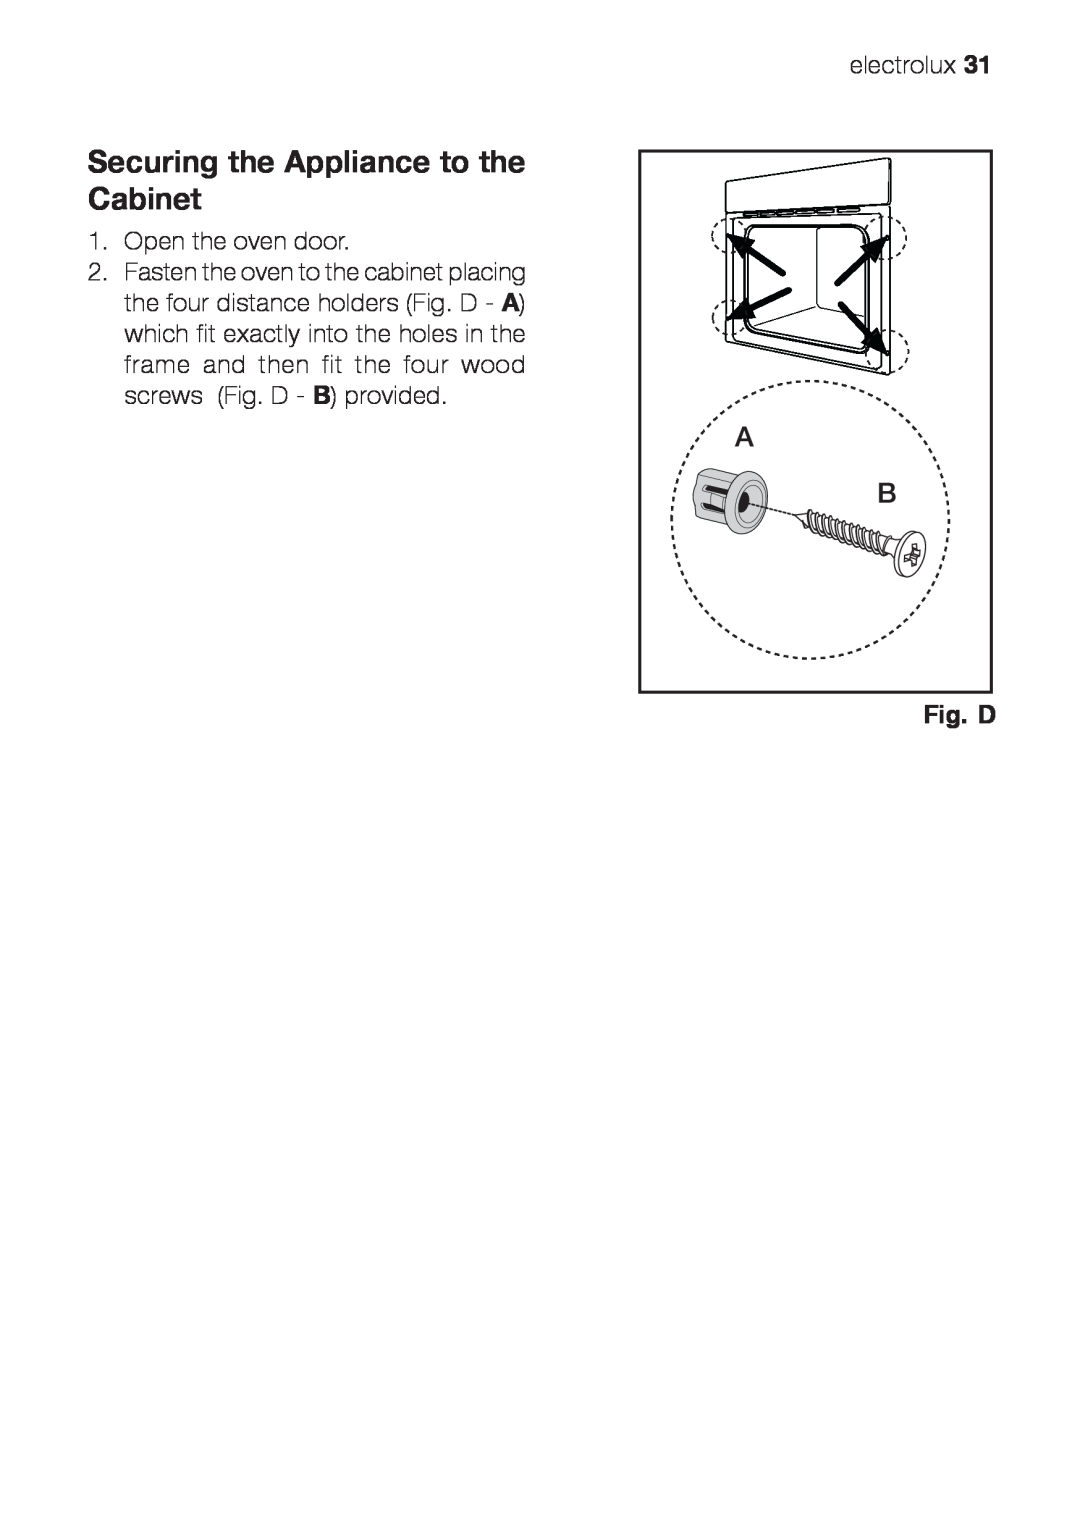 Electrolux EOG 10000 user manual Securing the Appliance to the Cabinet, Fig. D 